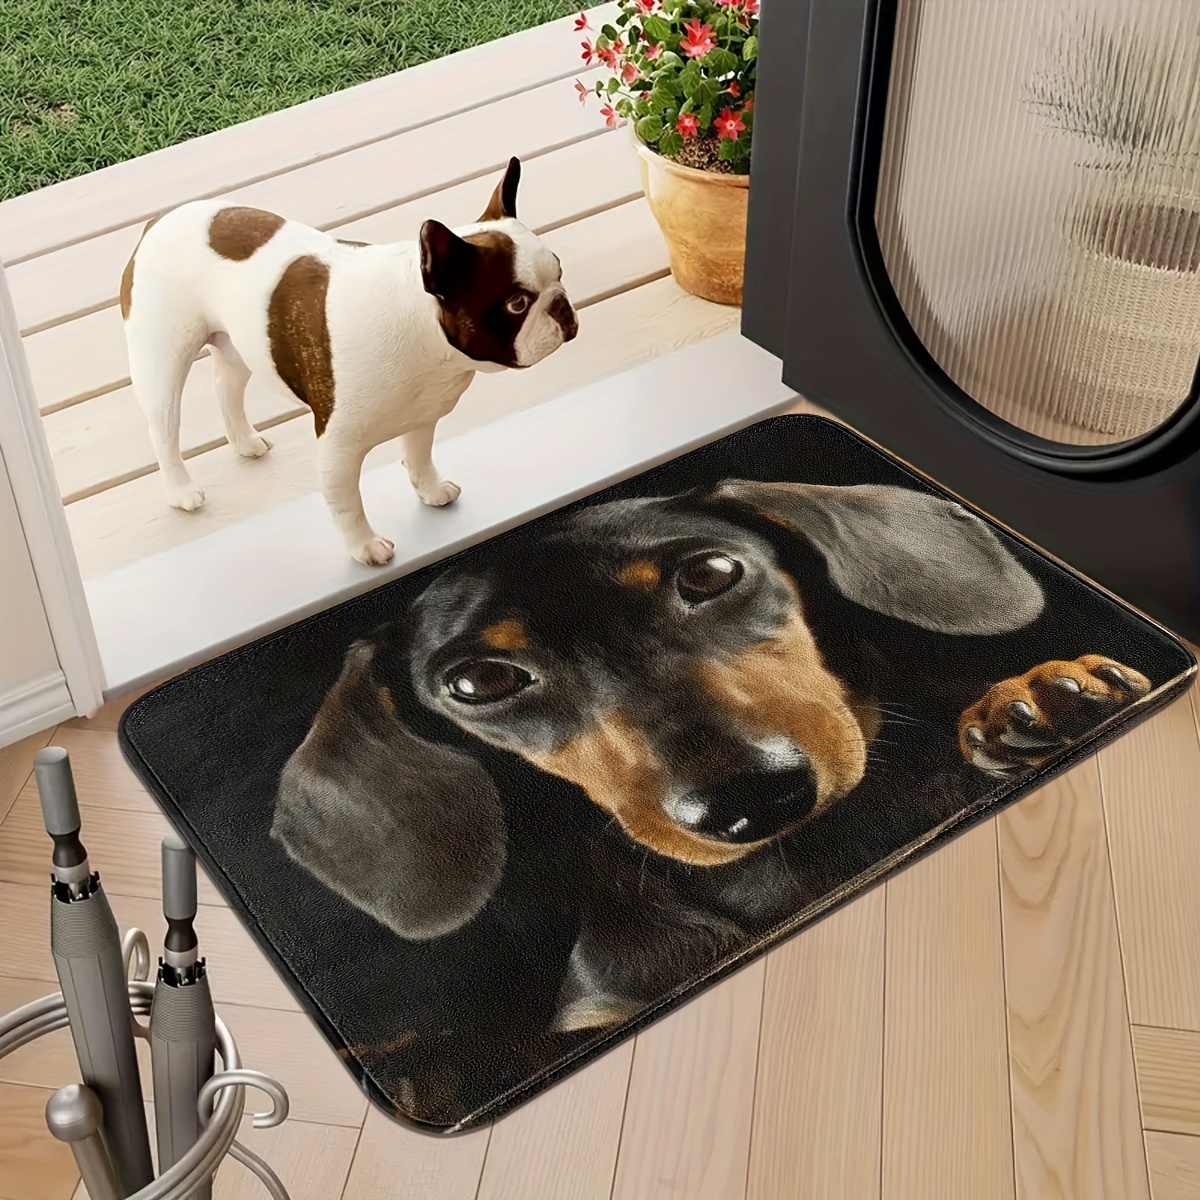 

Black Dachshund Print Soft Flannel Door Mat - Absorbent, Non-slip & Stain Resistant Rug For Home Entrance, Bedroom, Living Room, Kitchen - Machine Washable